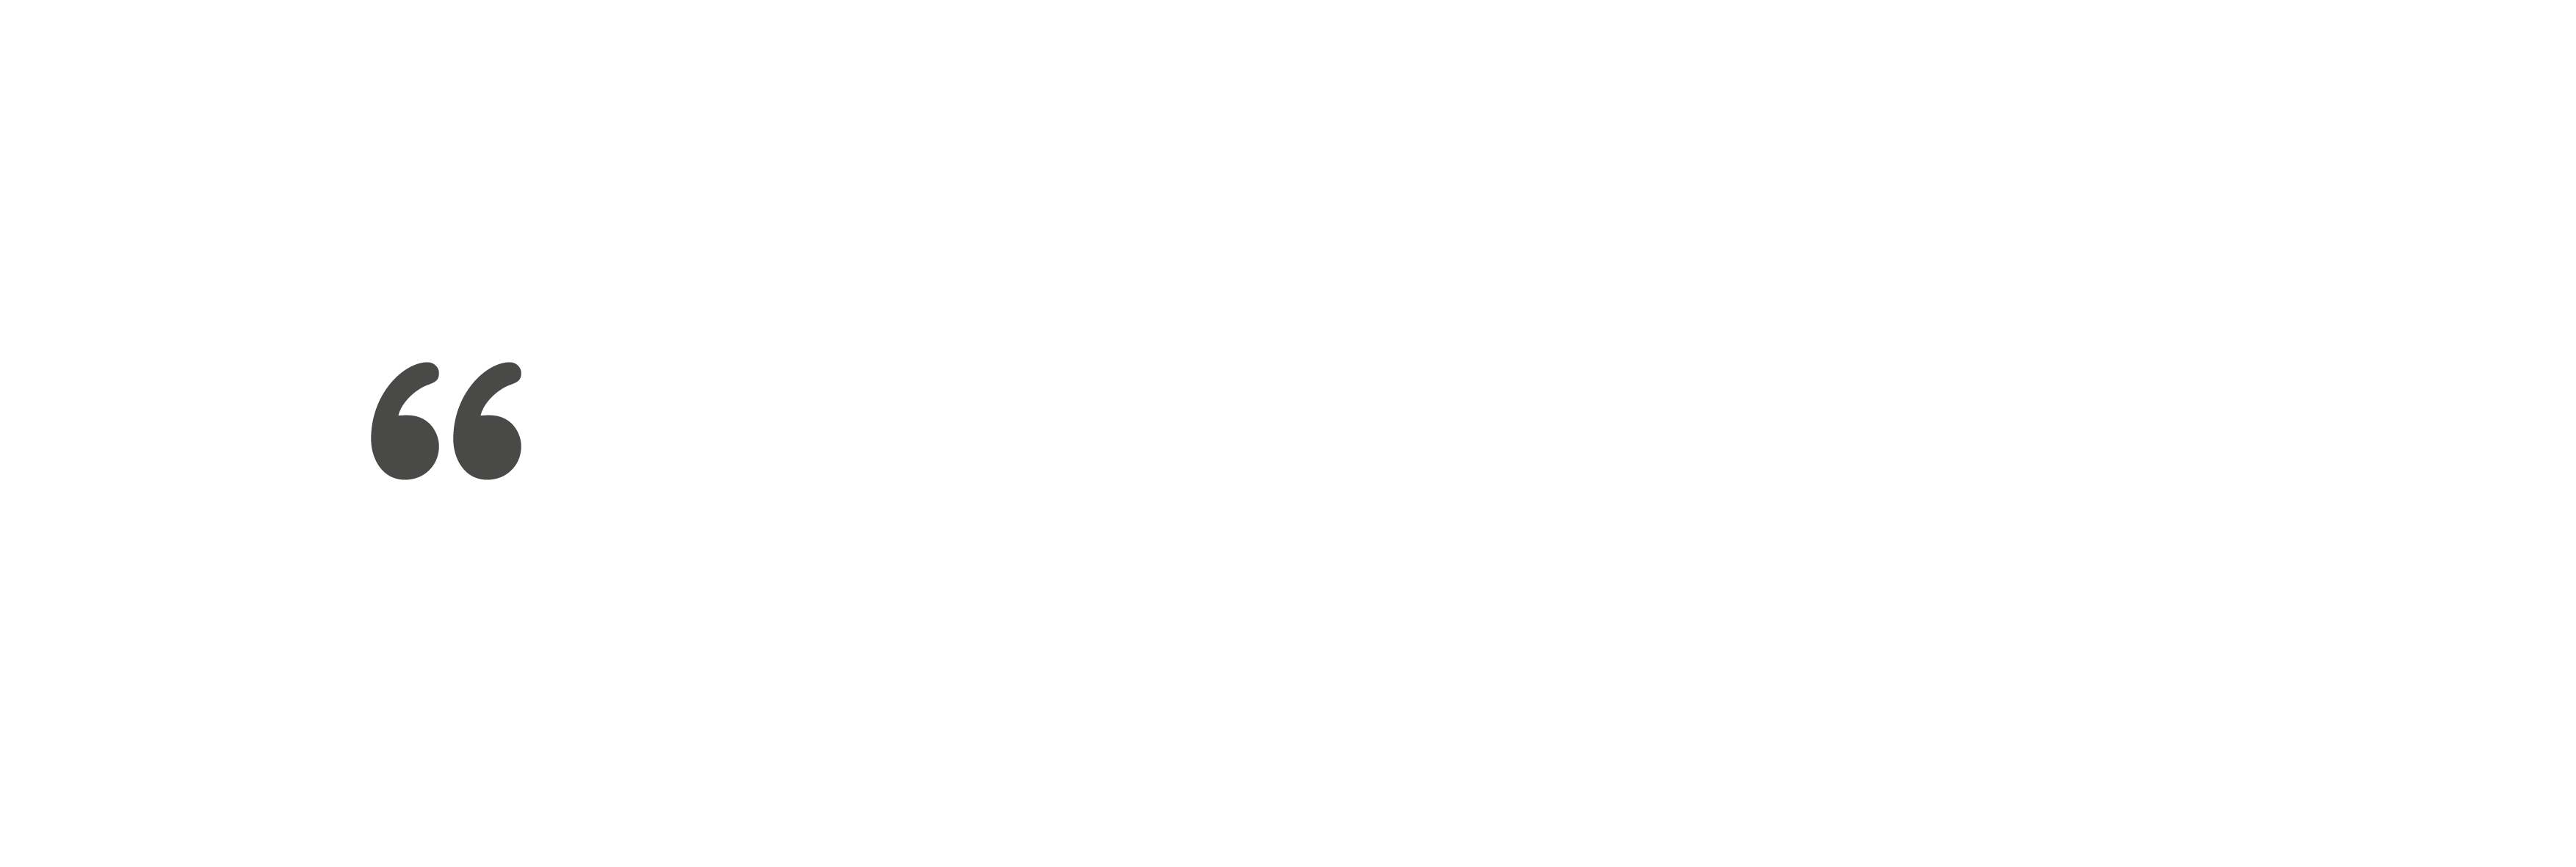 quotes_uk.png